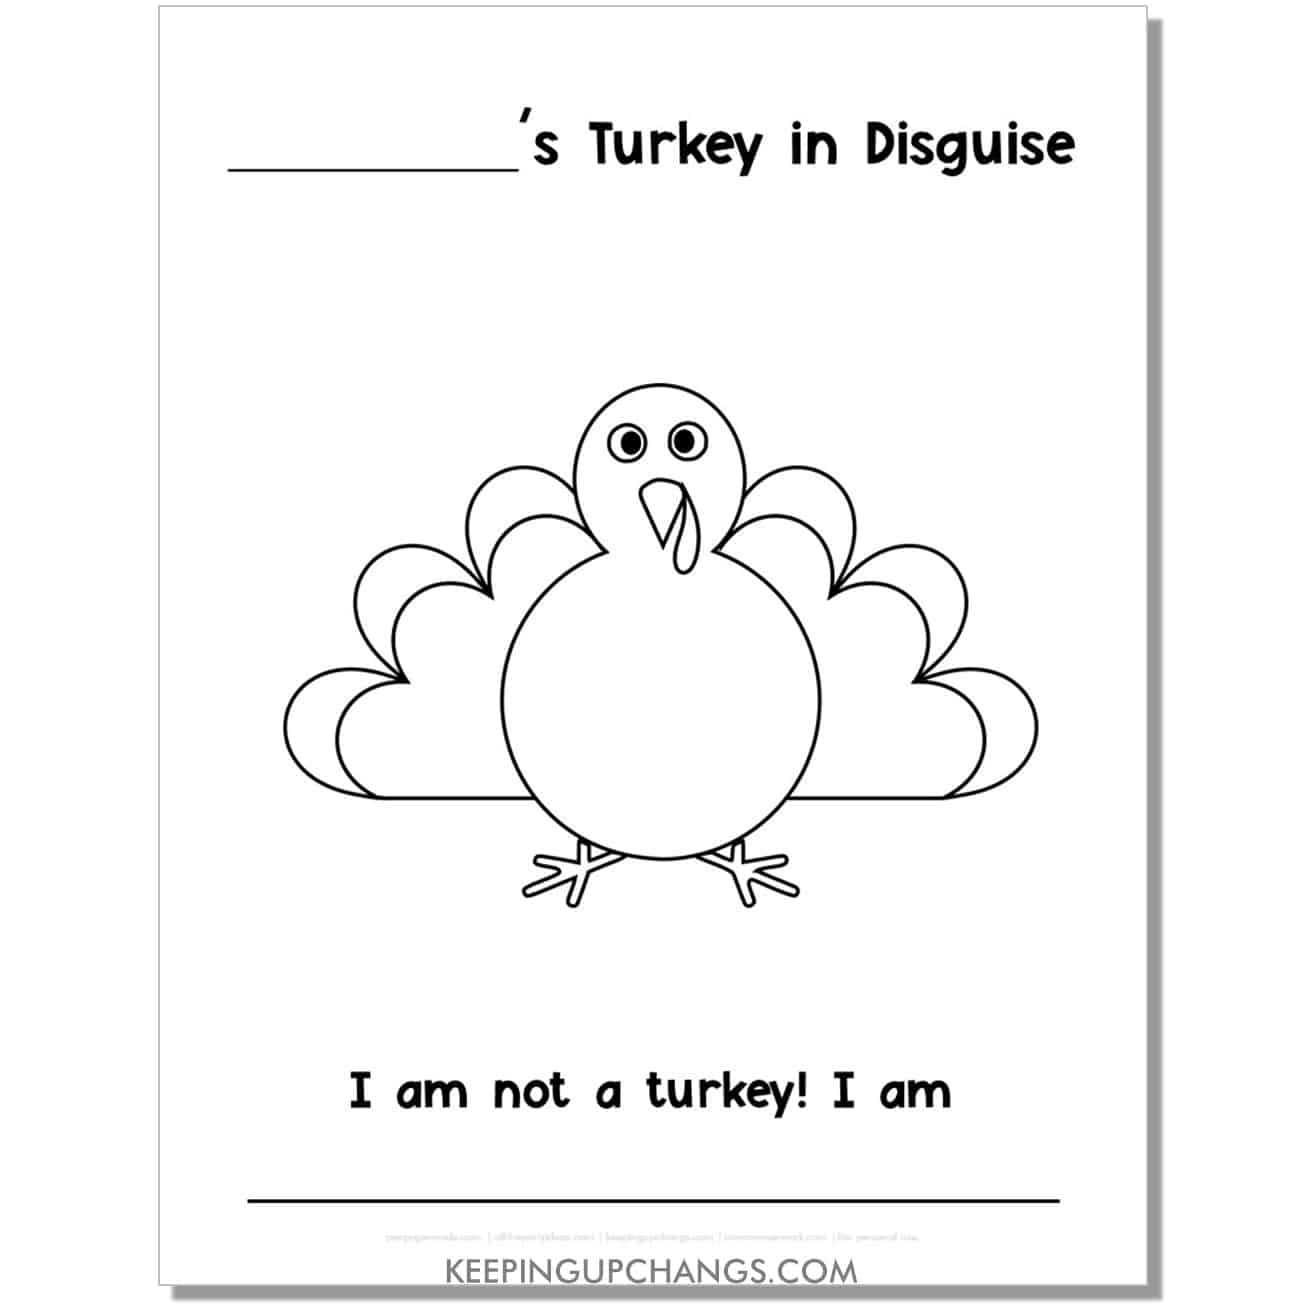 free turkey disguise project template with easy, simple turkey.